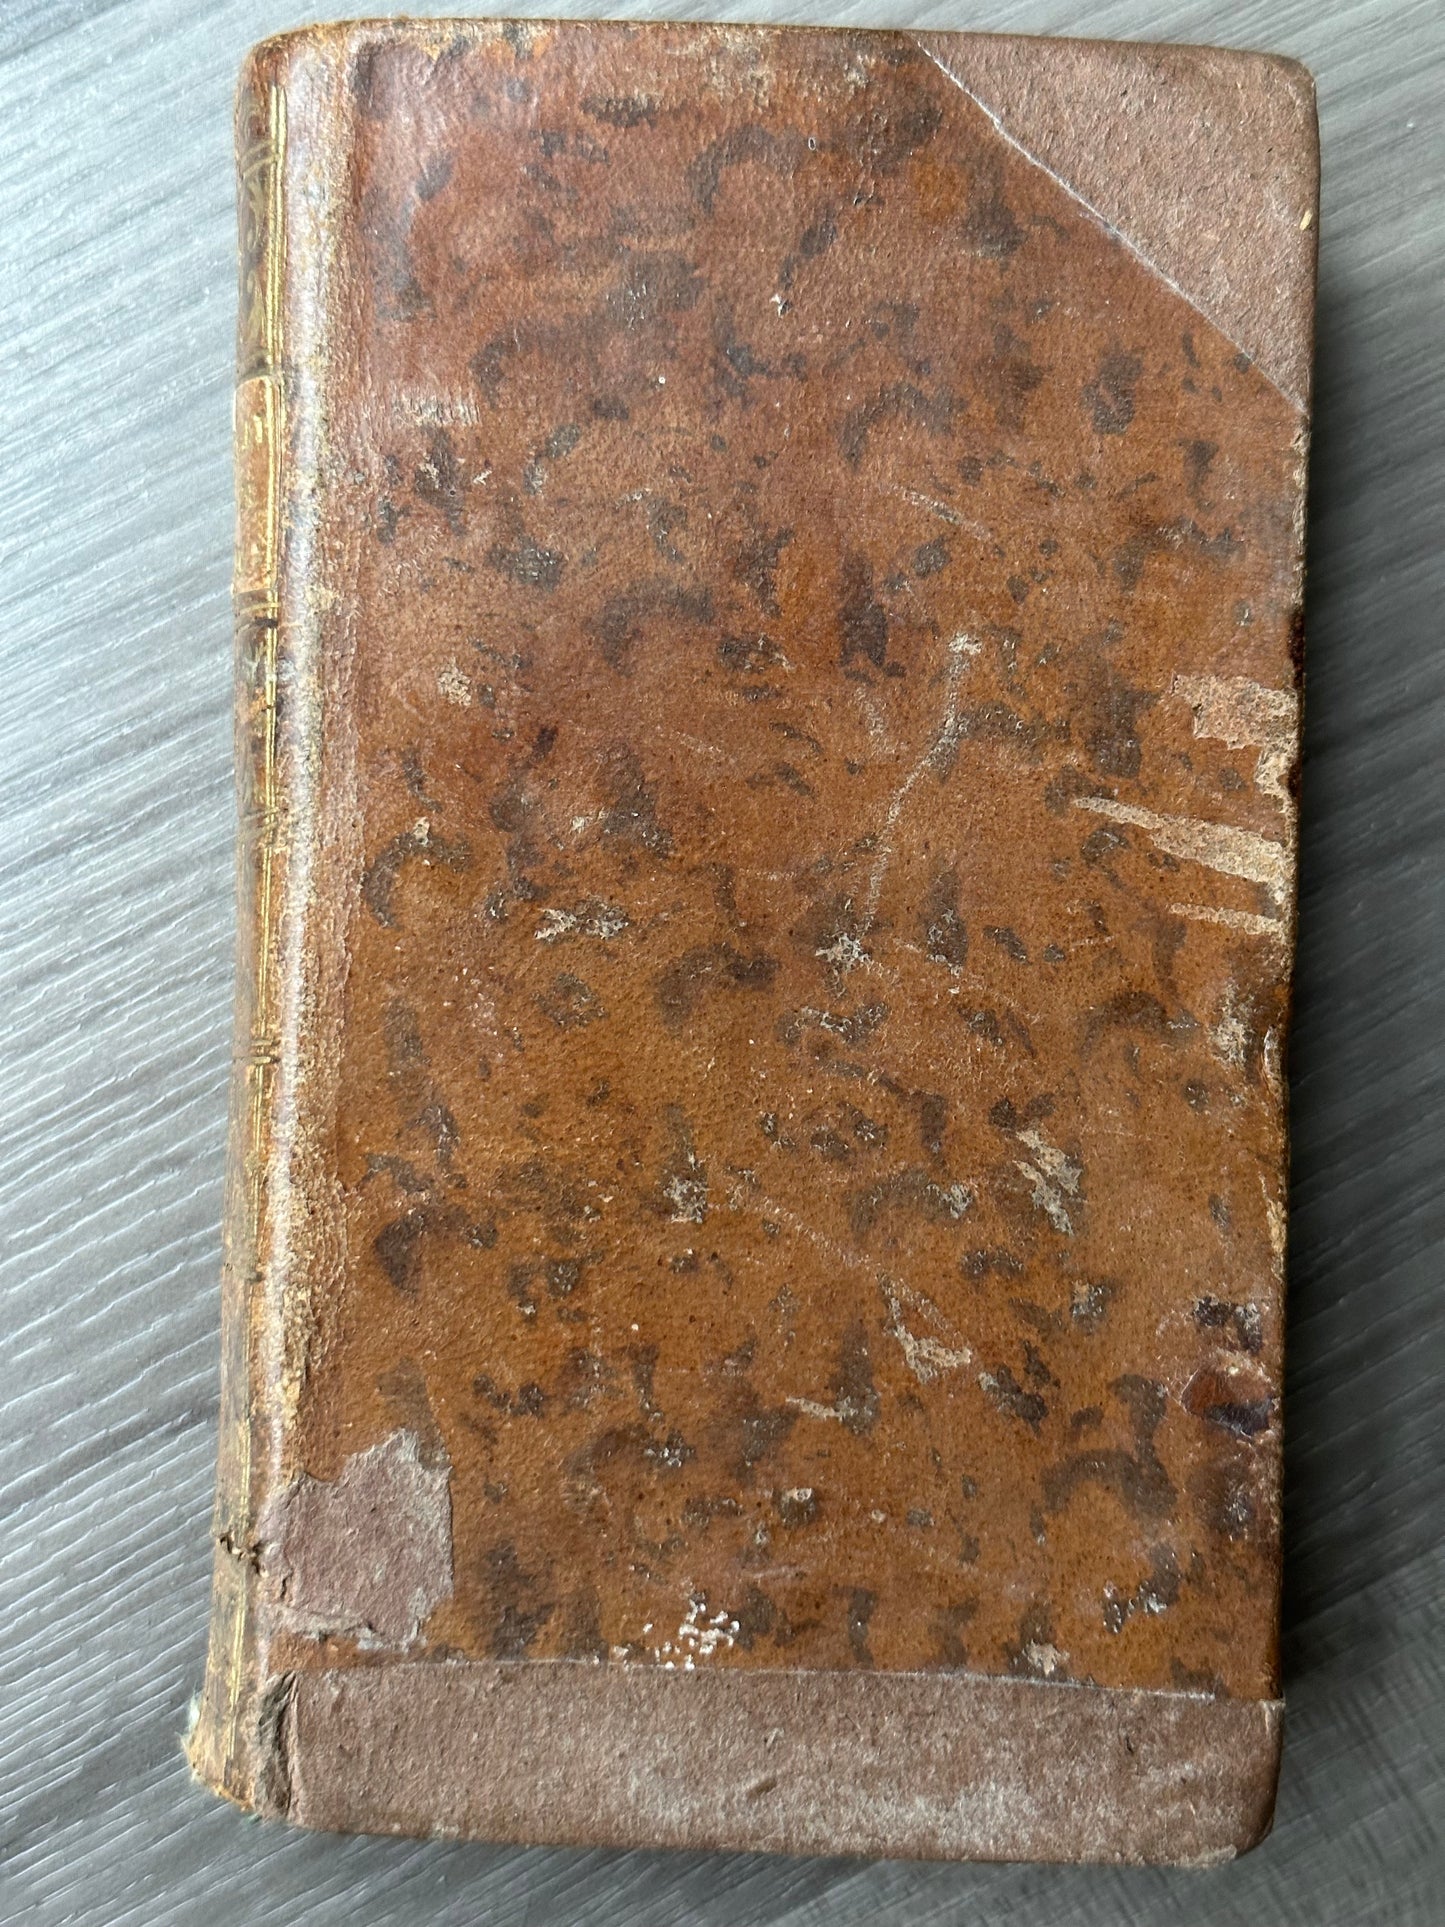 1764 French Religion Book